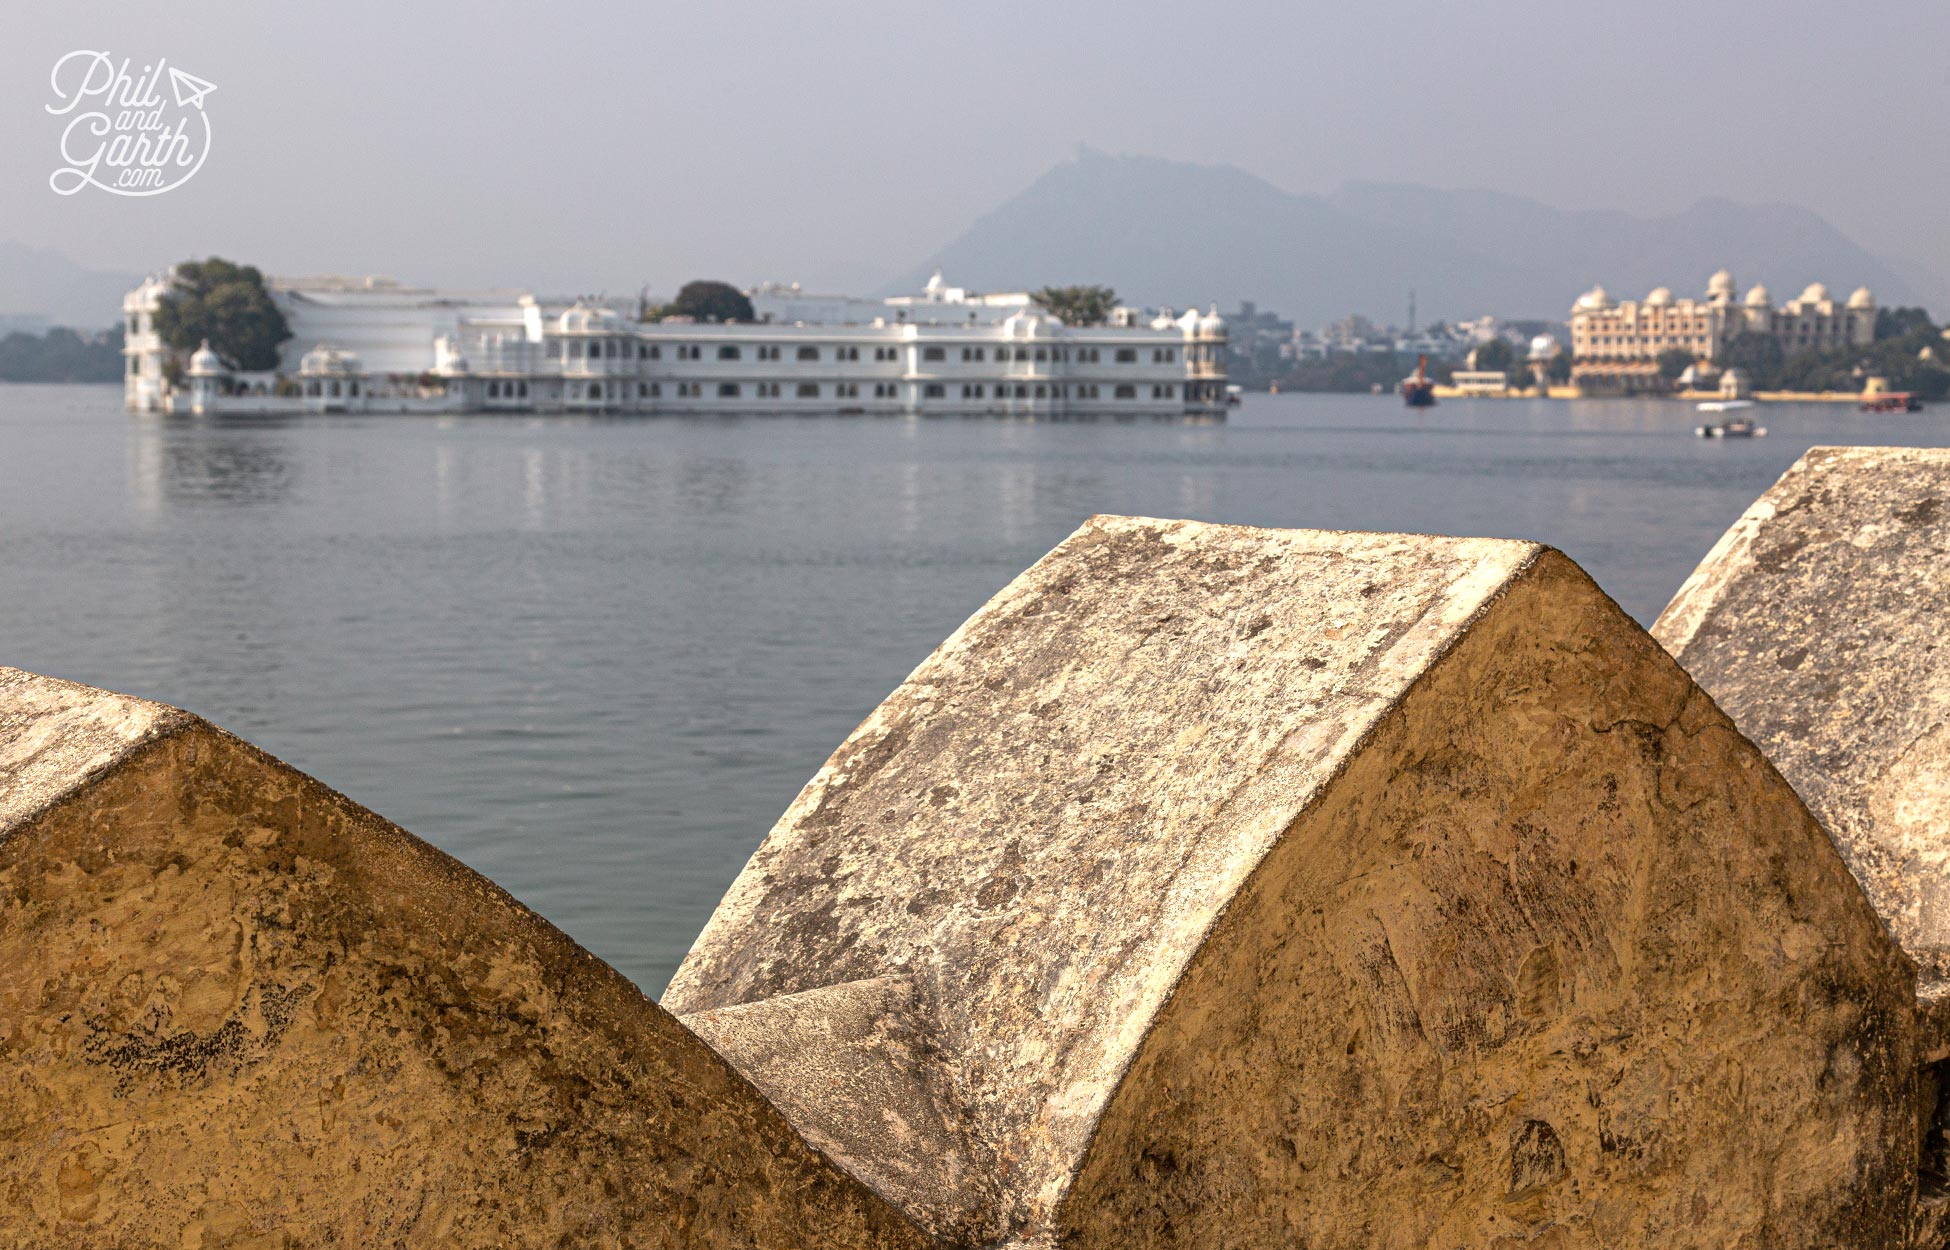 Udaipur is really popular location for Indian weddings